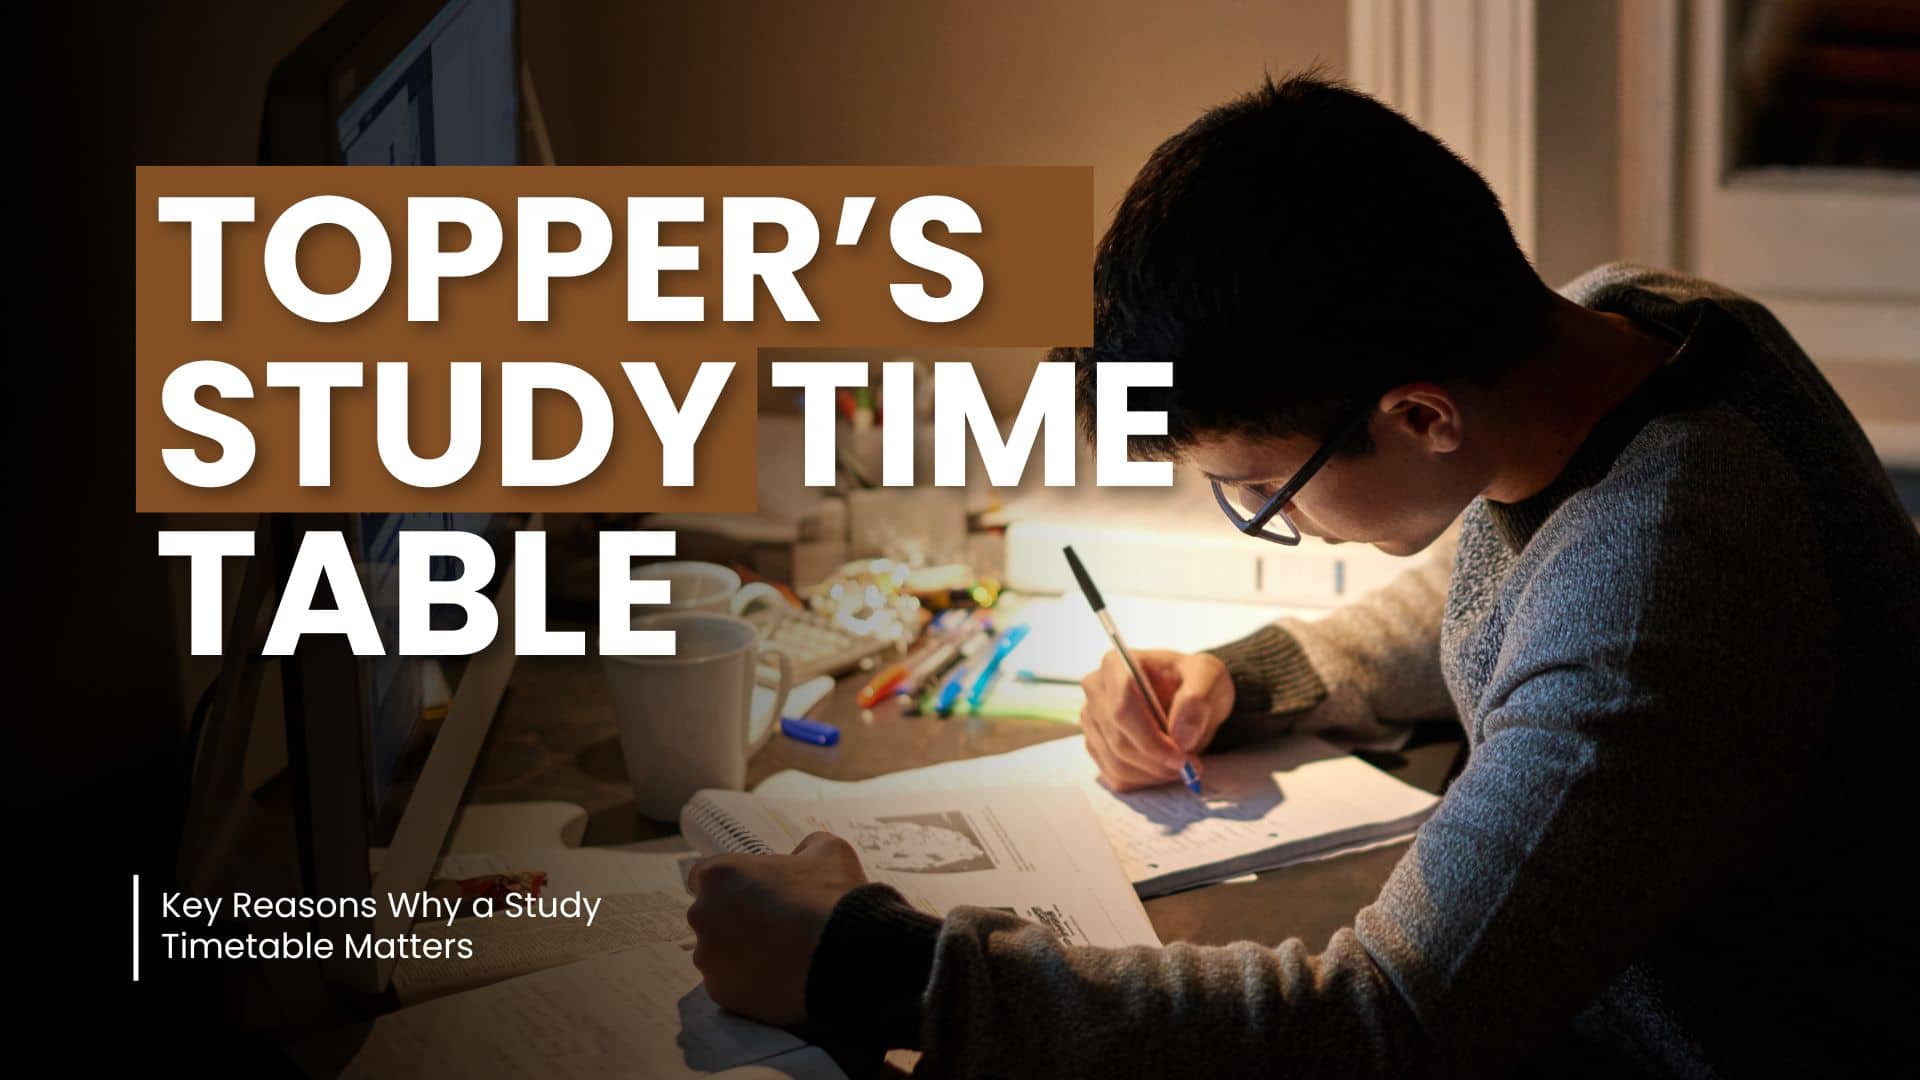 Toppers Study Time Table